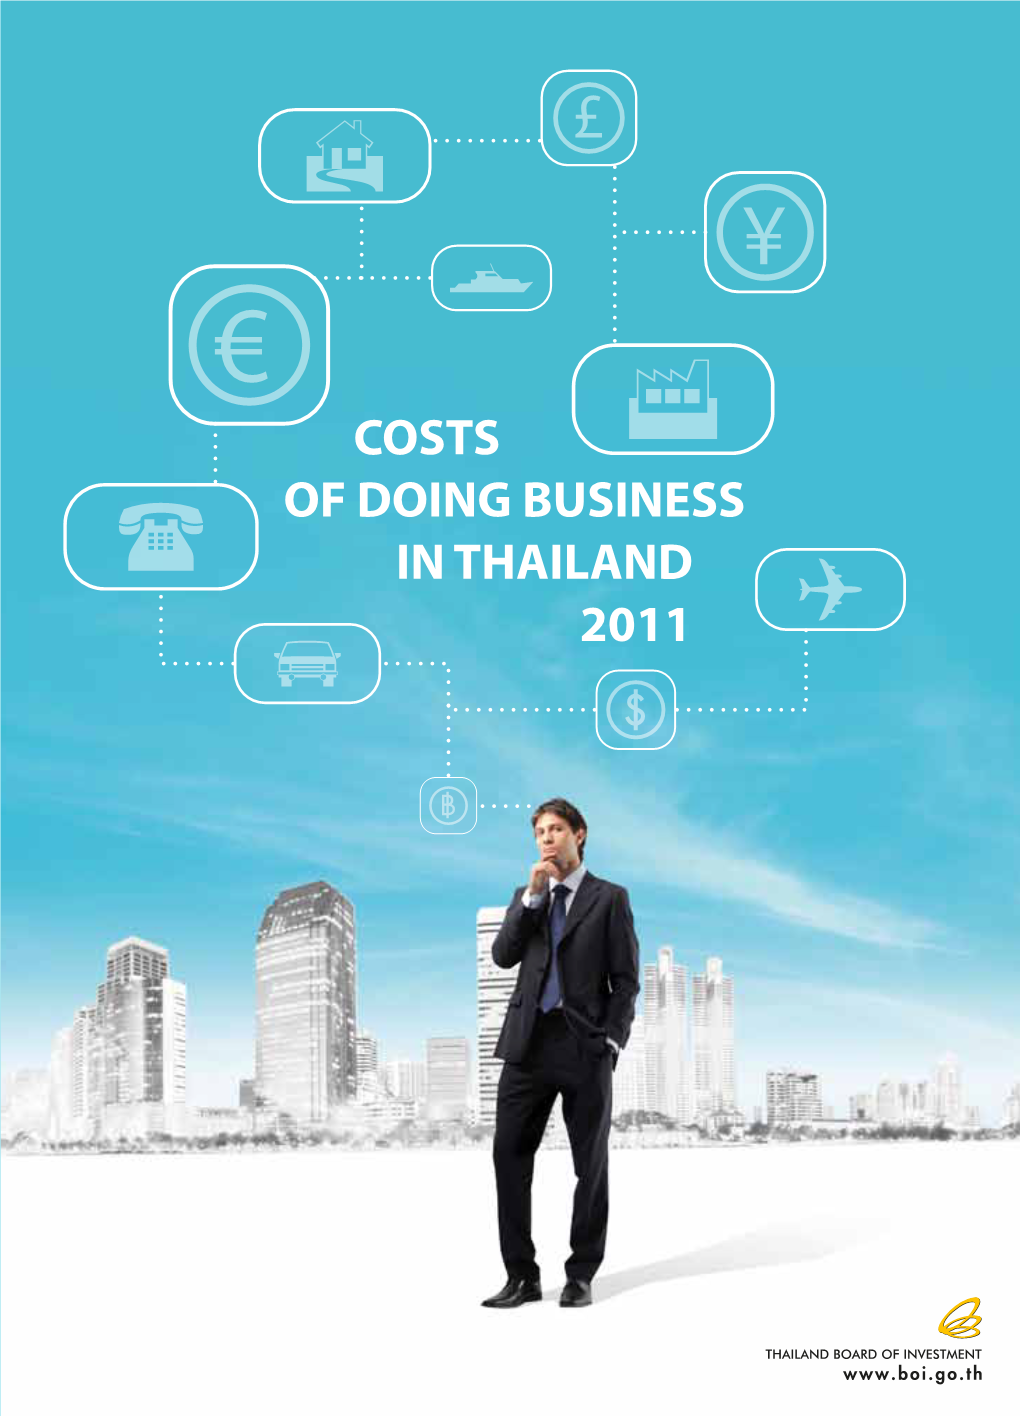 Costs of Doing Business in Thailand 2011 Contents